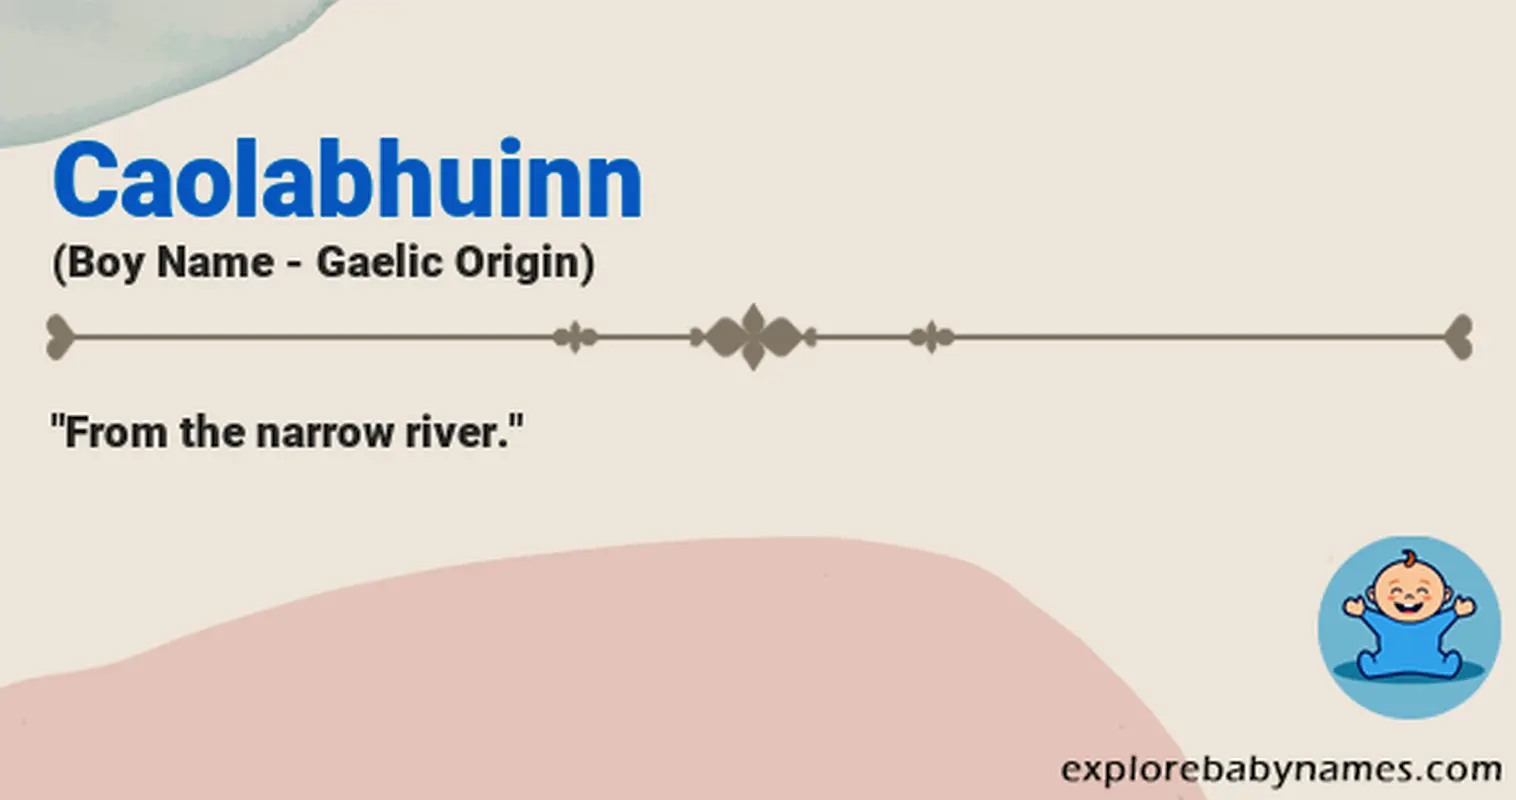 Meaning of Caolabhuinn